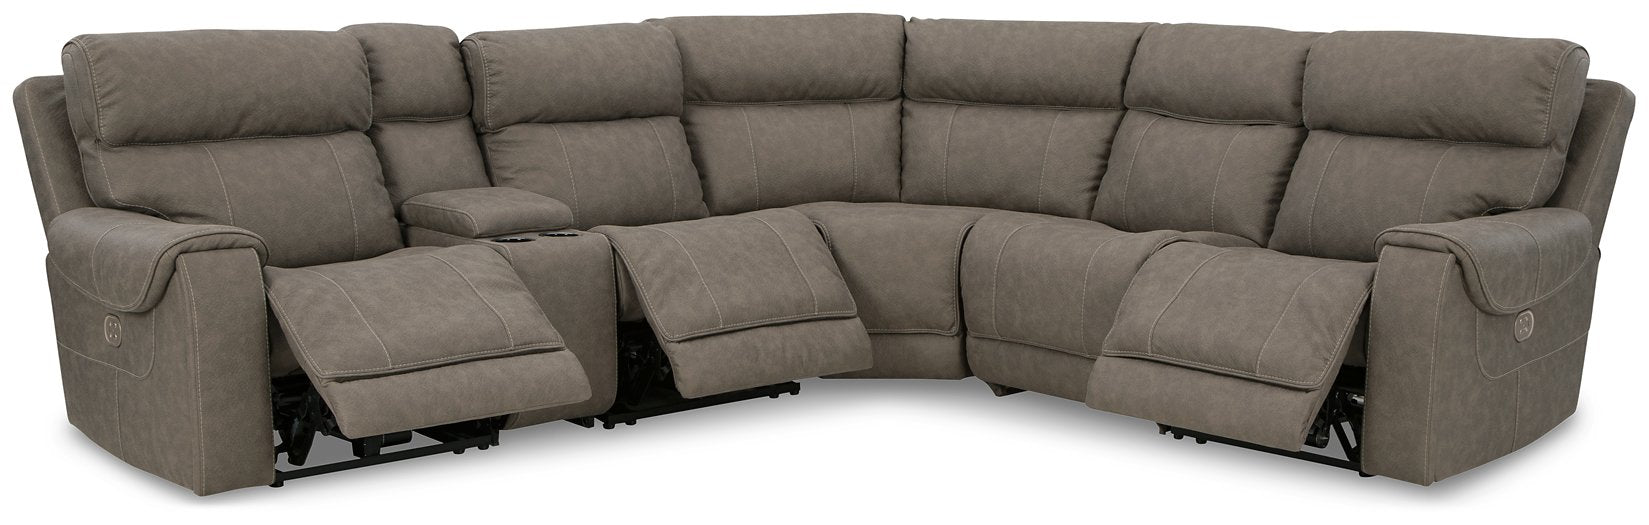 Starbot Power Reclining Sectional - Hometown Comfort Station